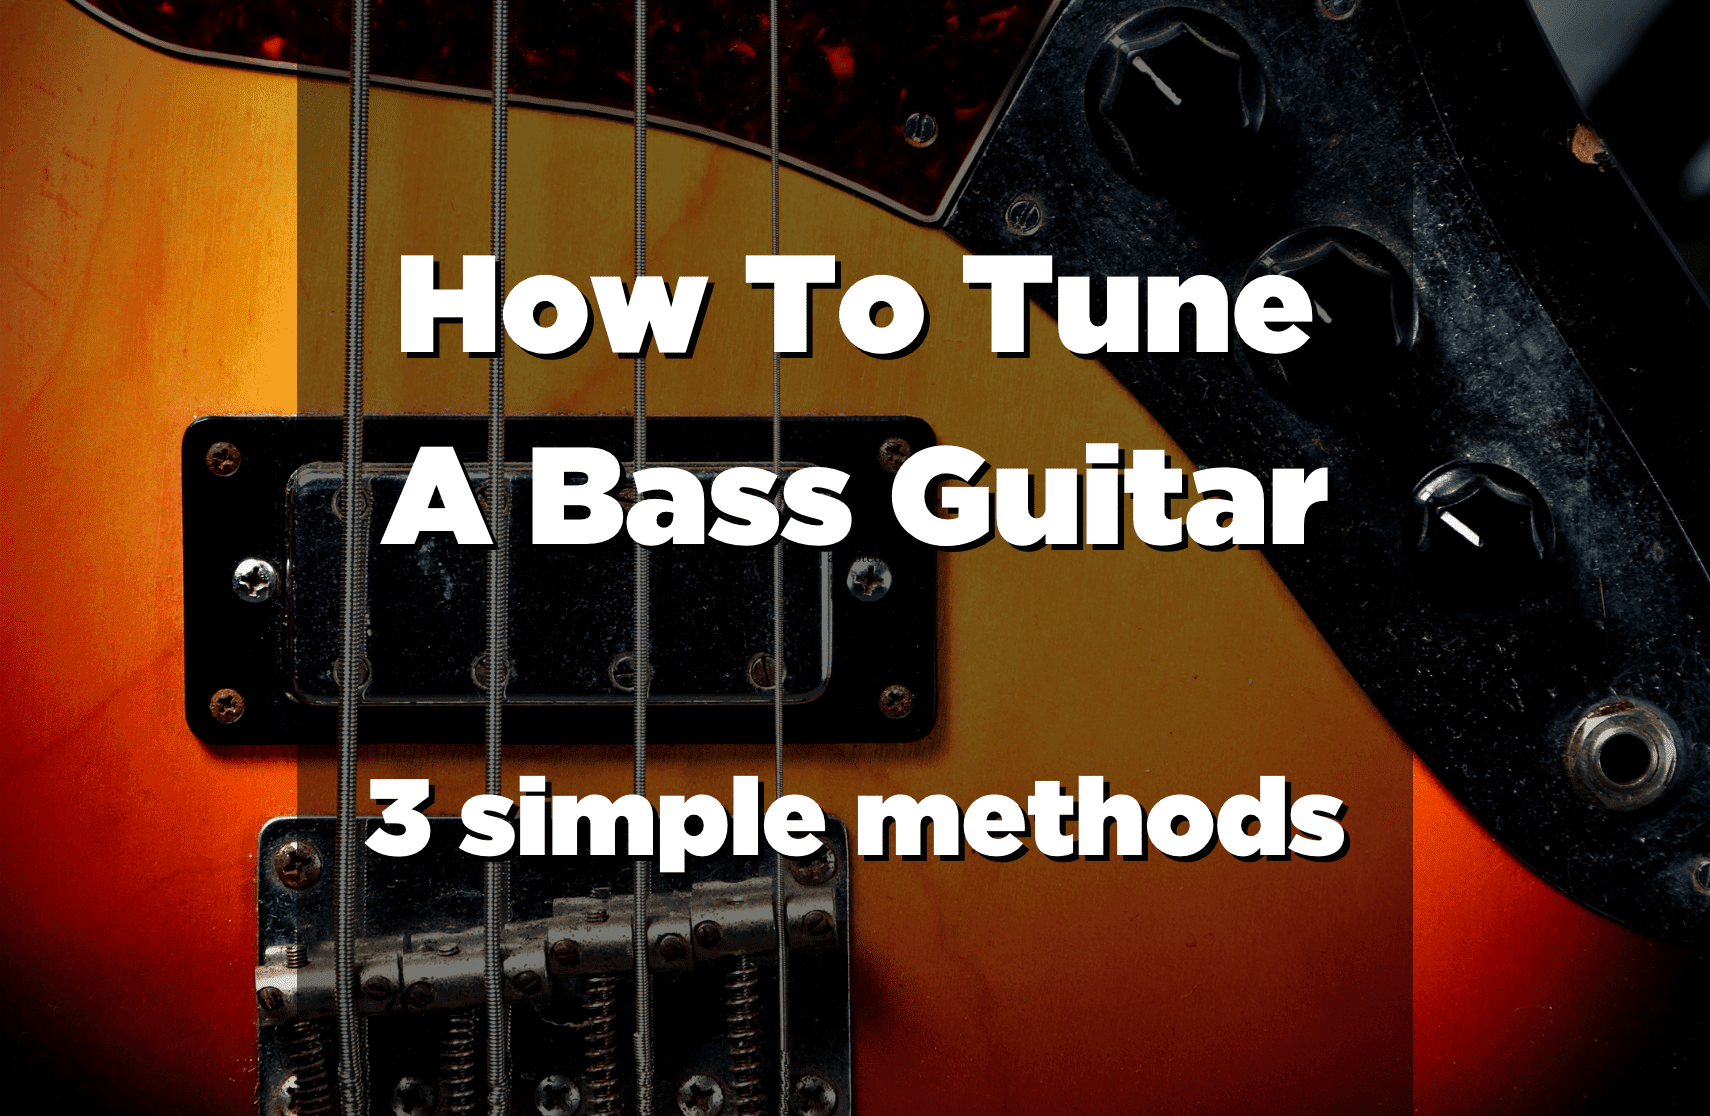 Tune Bass Maniac. Notes Bass for Tuning. String Guide on Bass. Bass tuning